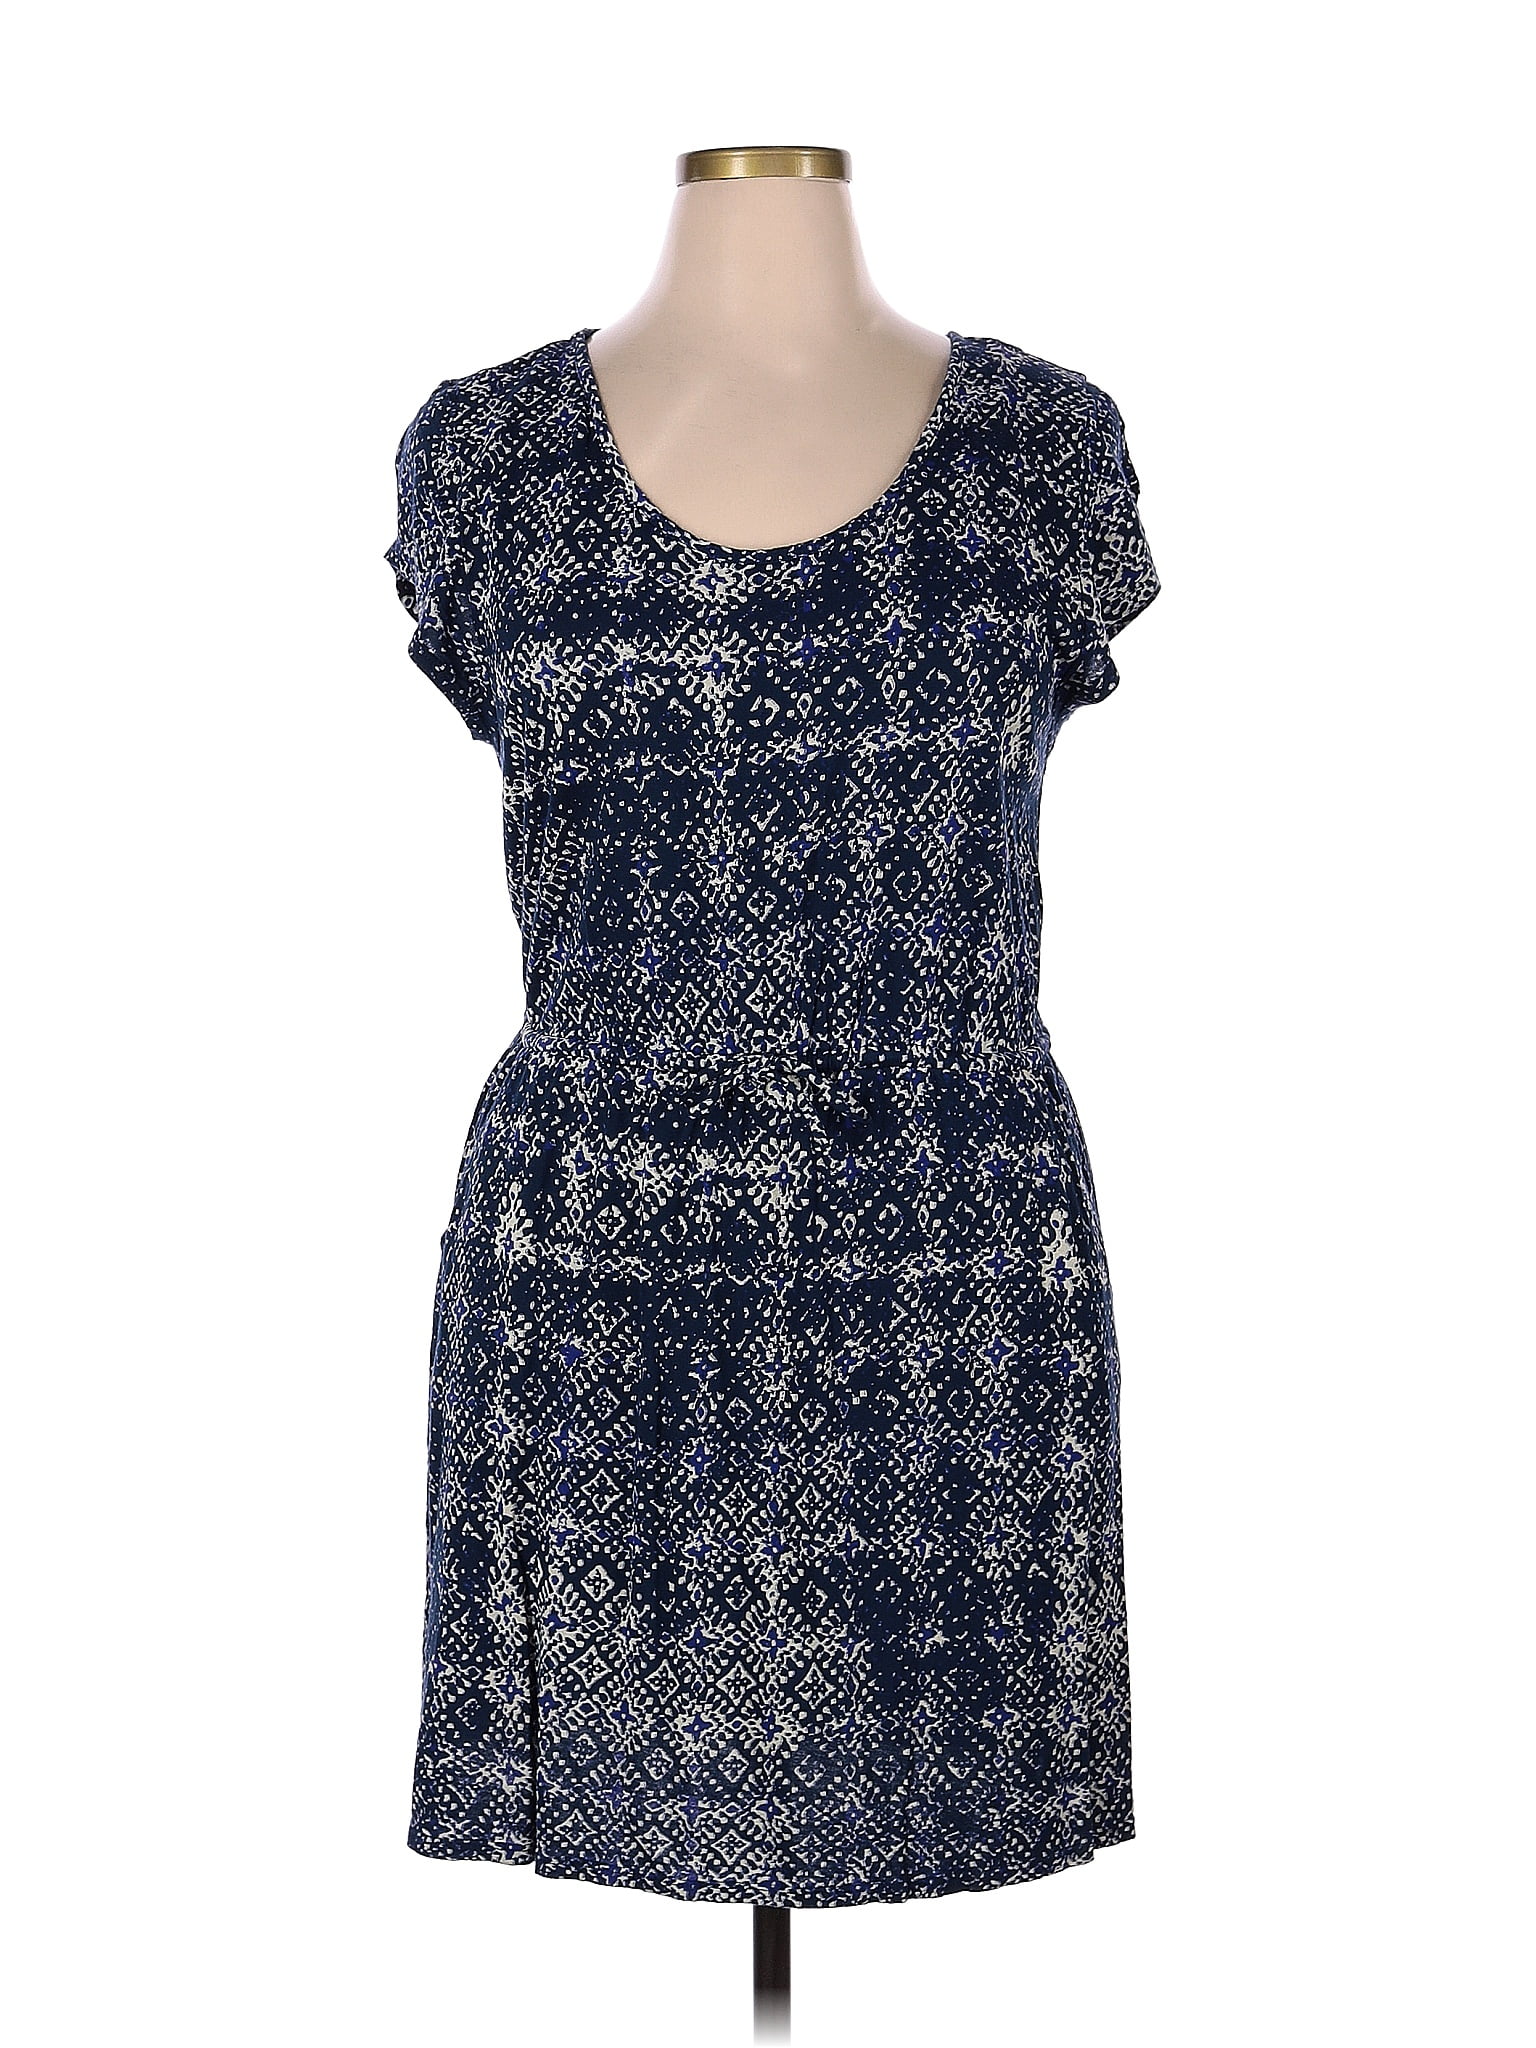 Lucky Brand 100% Viscose Multi Color Blue Casual Dress Size S - 68% off